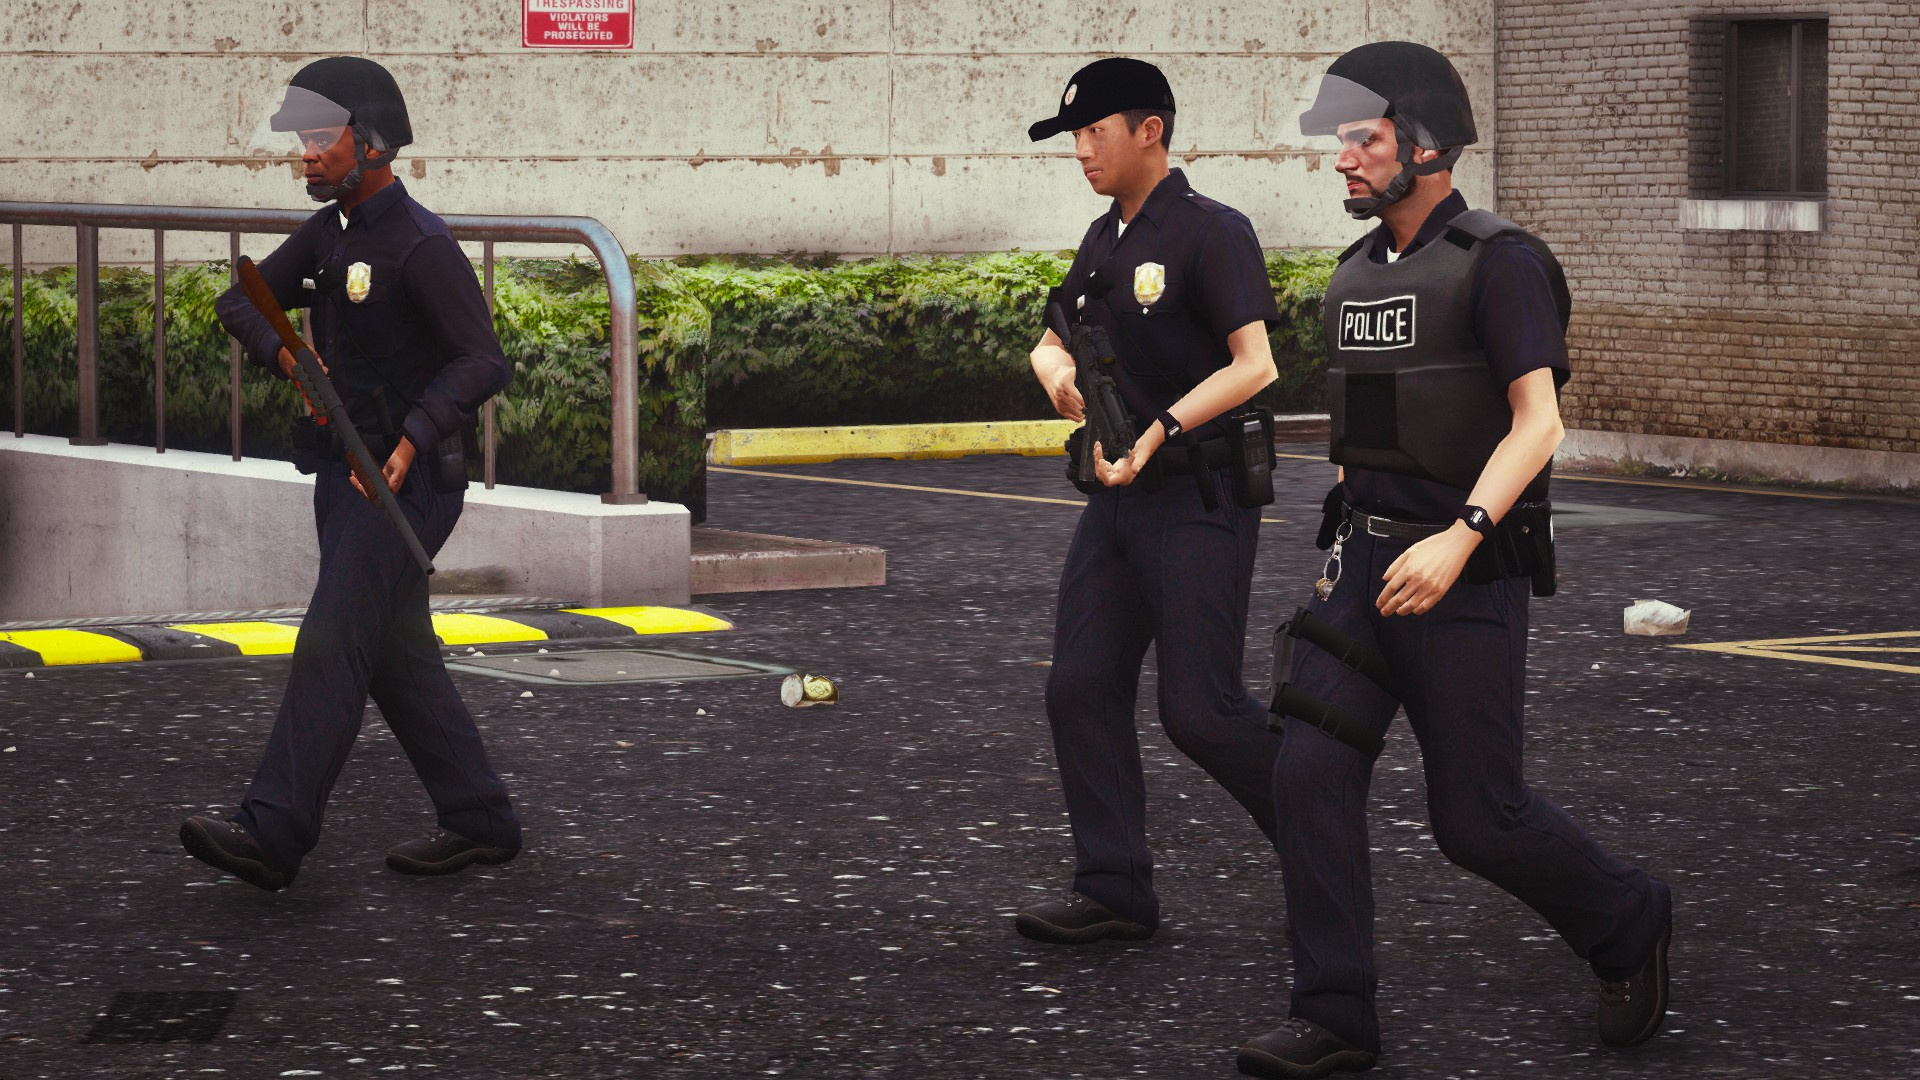 Gta 5 Lspd Police Officers